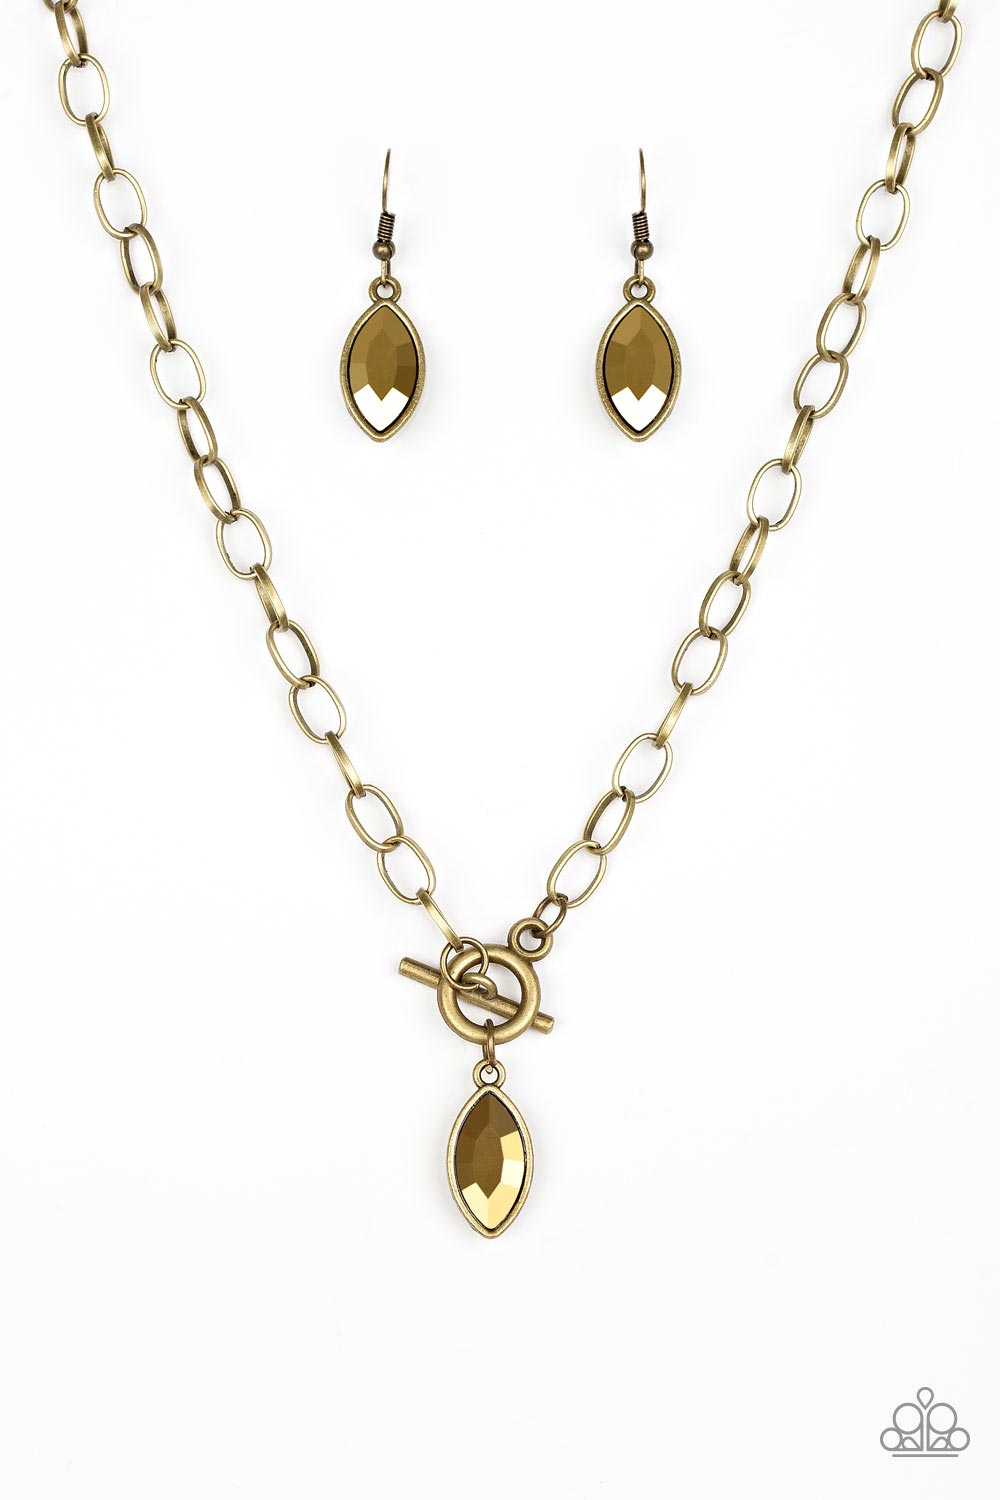 Paparazzi Accessories - Chicly Centered - Brass Necklace